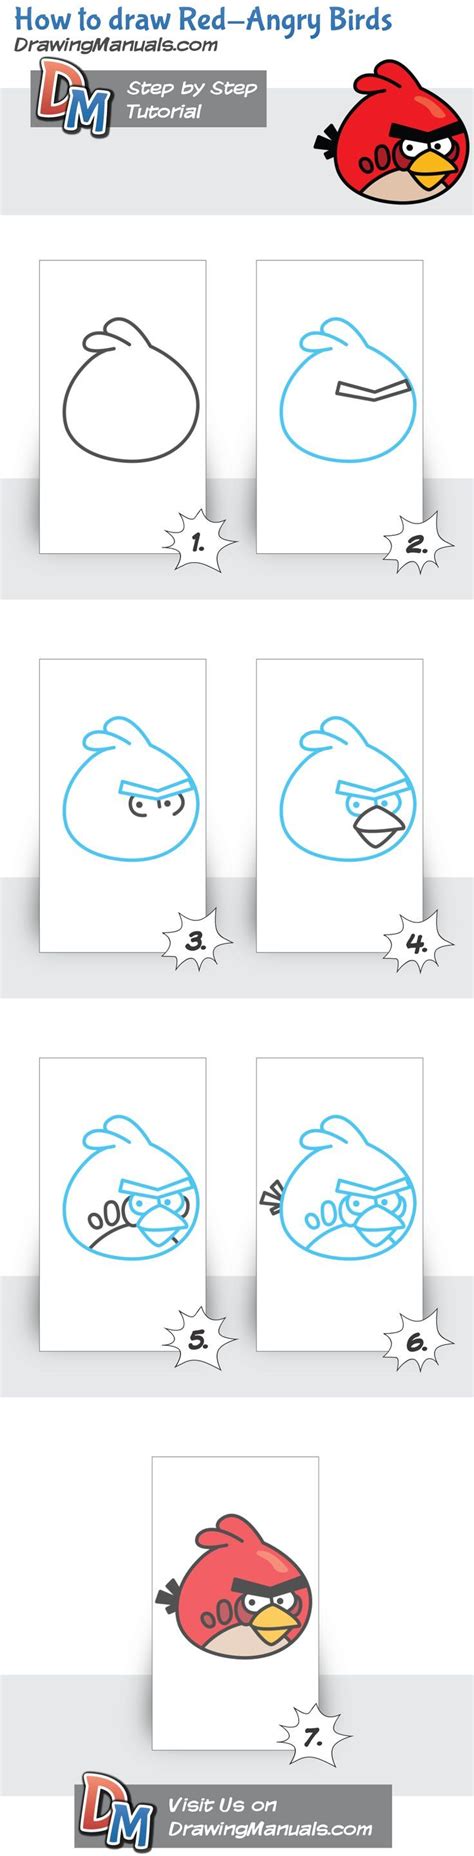 Draw Pattern How To Draw Red Angry Birds Codesign Magazine Daily